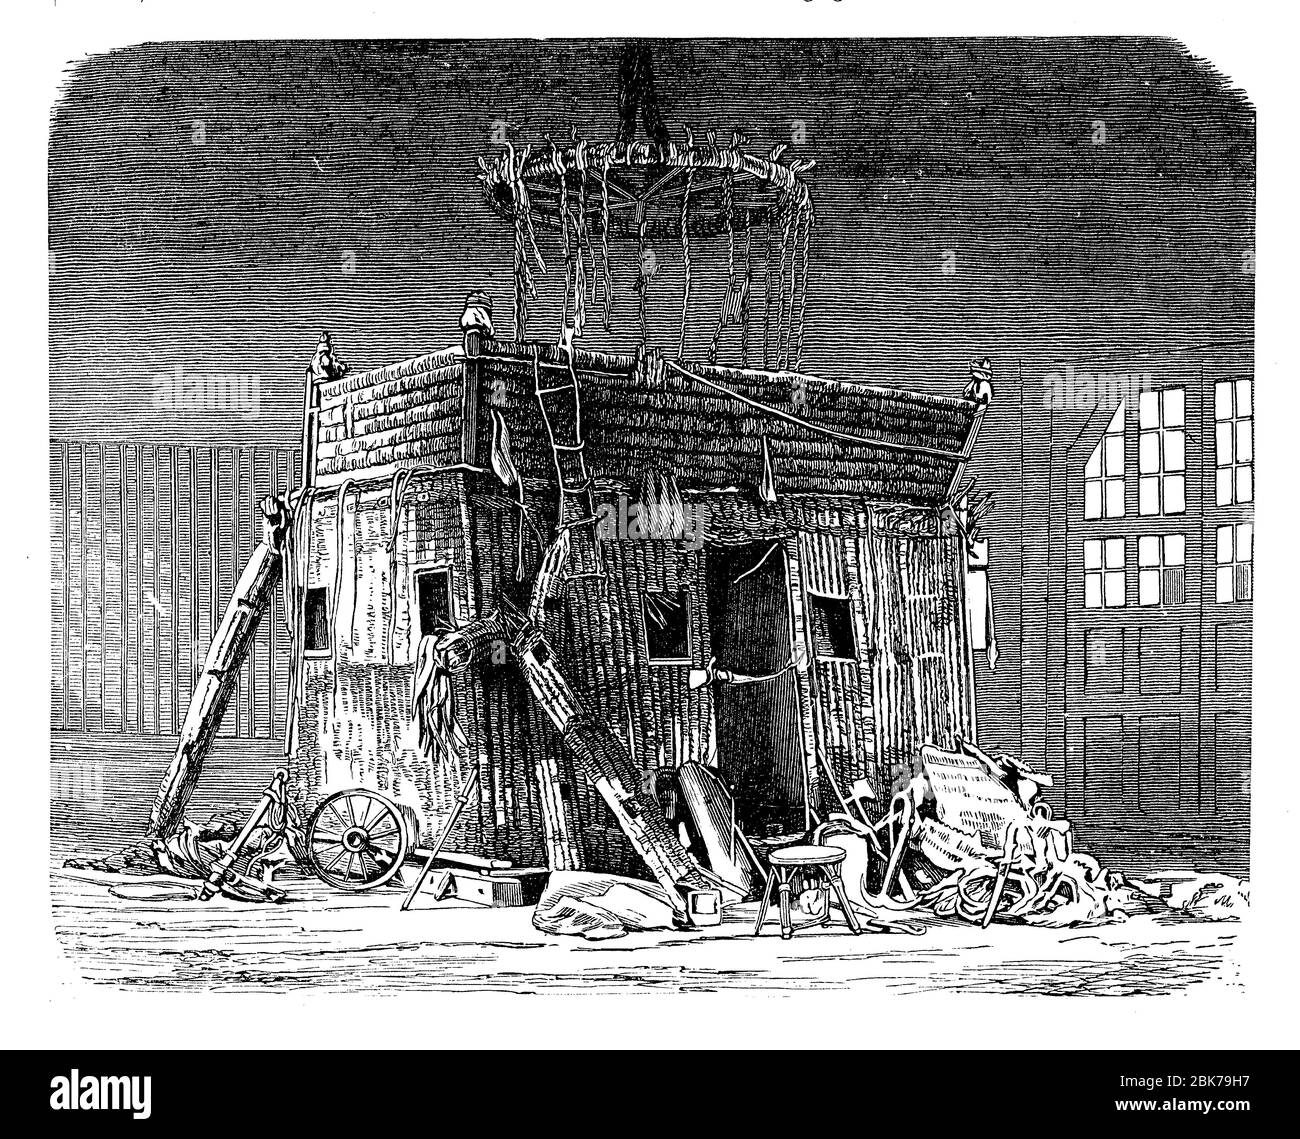 The two stories gondola made of wicker with a balcony of the Le Geant balloon after the disaster in 1863 Stock Photo